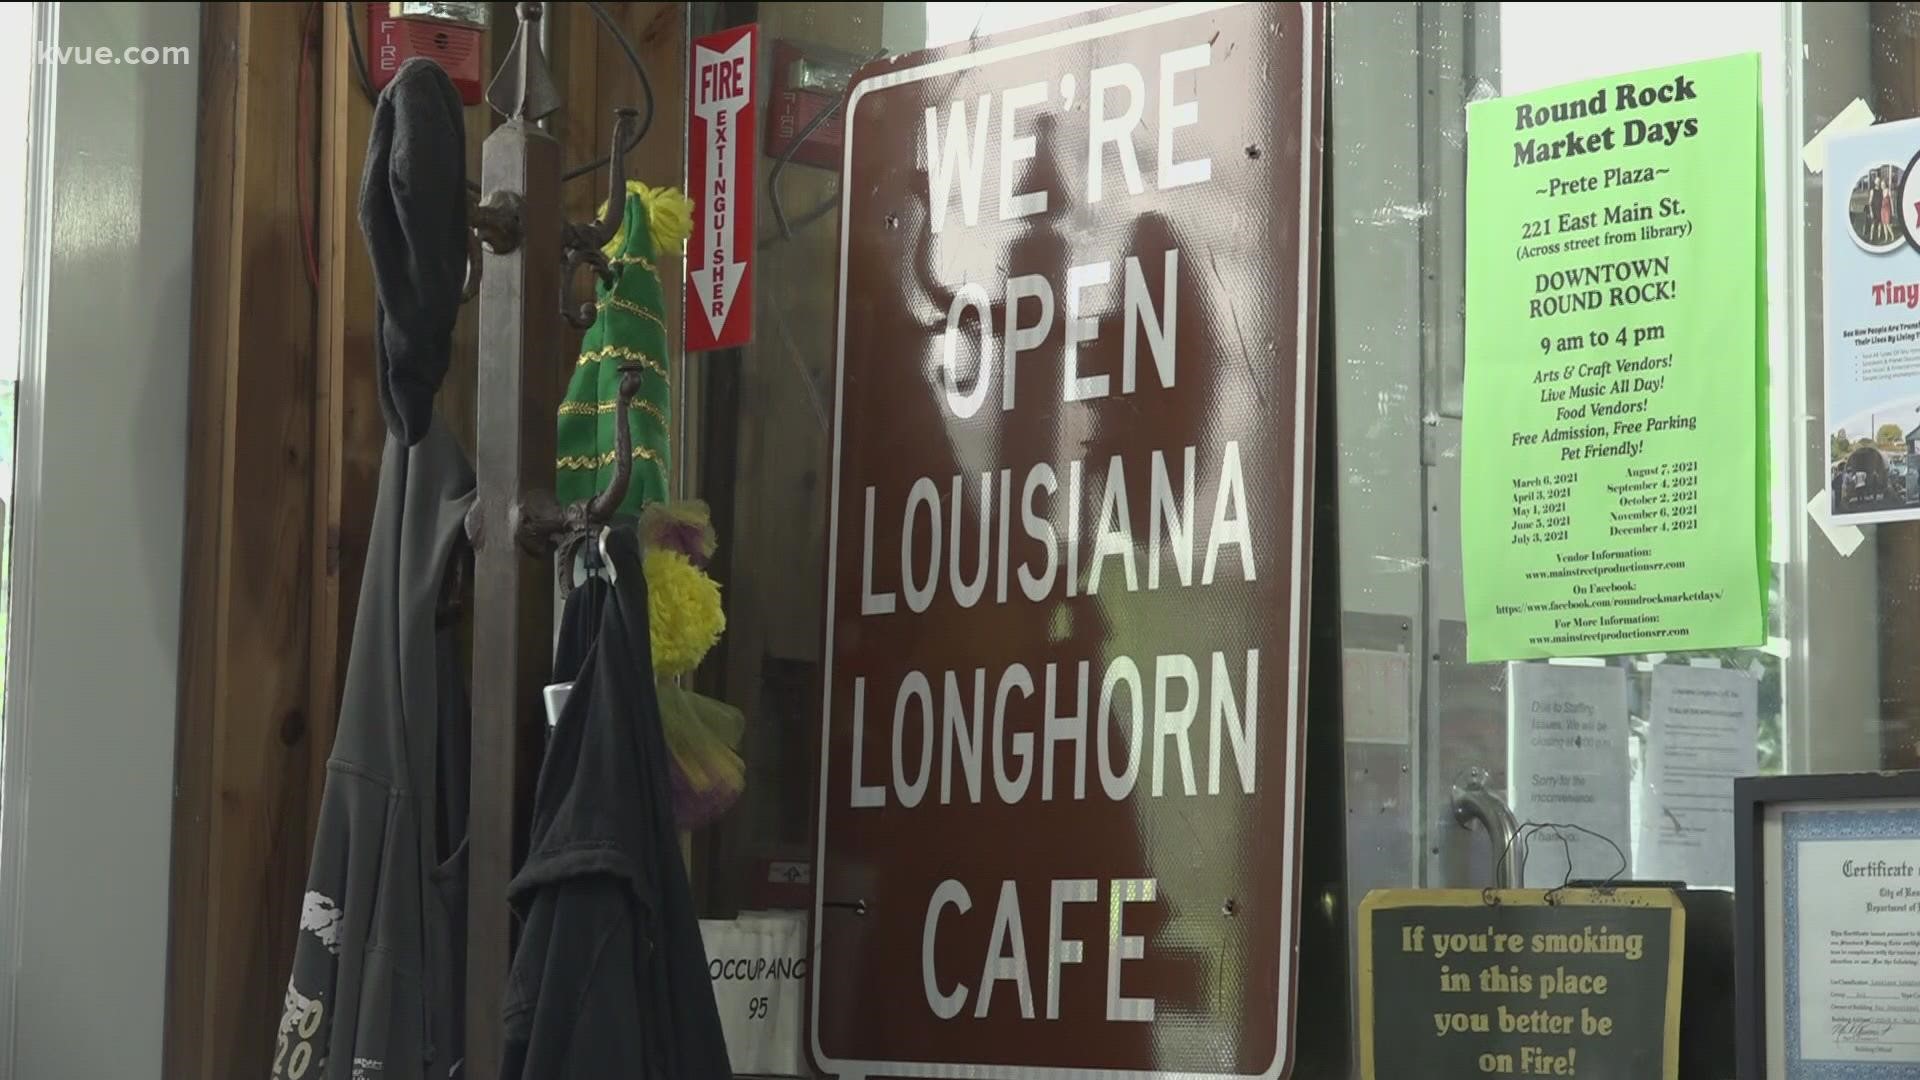 The owner of Louisiana Longhorn Café said a staffing shortage this large is a first after 18 years of business.